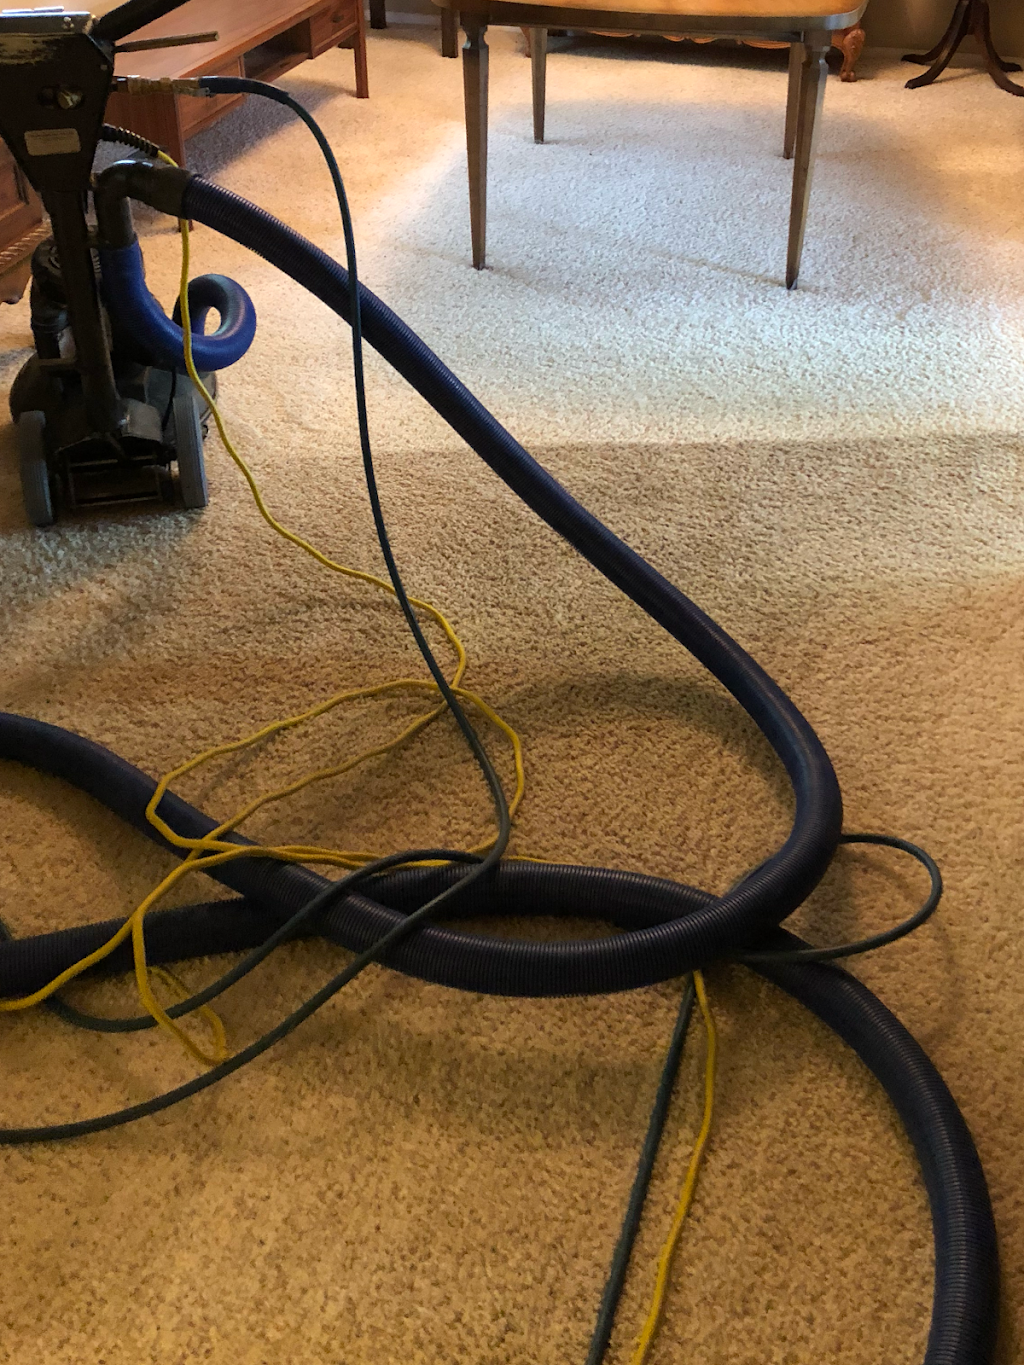 Above All Carpet Cleaning | 3748 Frakes Way, Yuba City, CA 95993 | Phone: (530) 671-1616